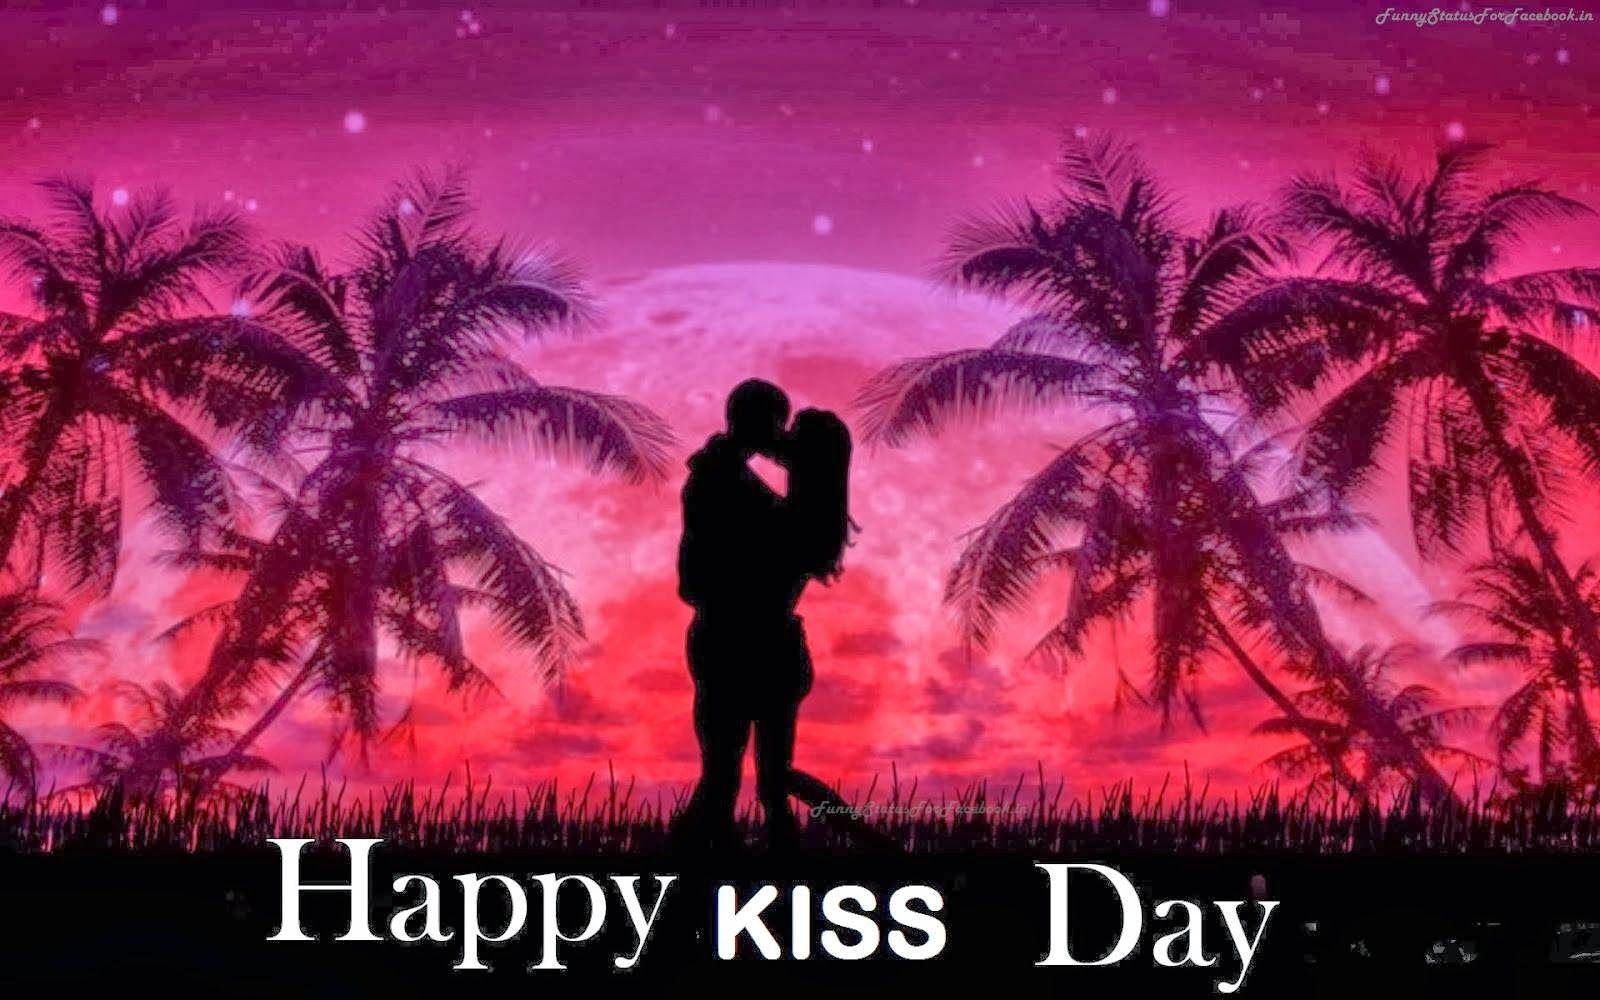 Happy Kiss Day Image Quotes HD .com